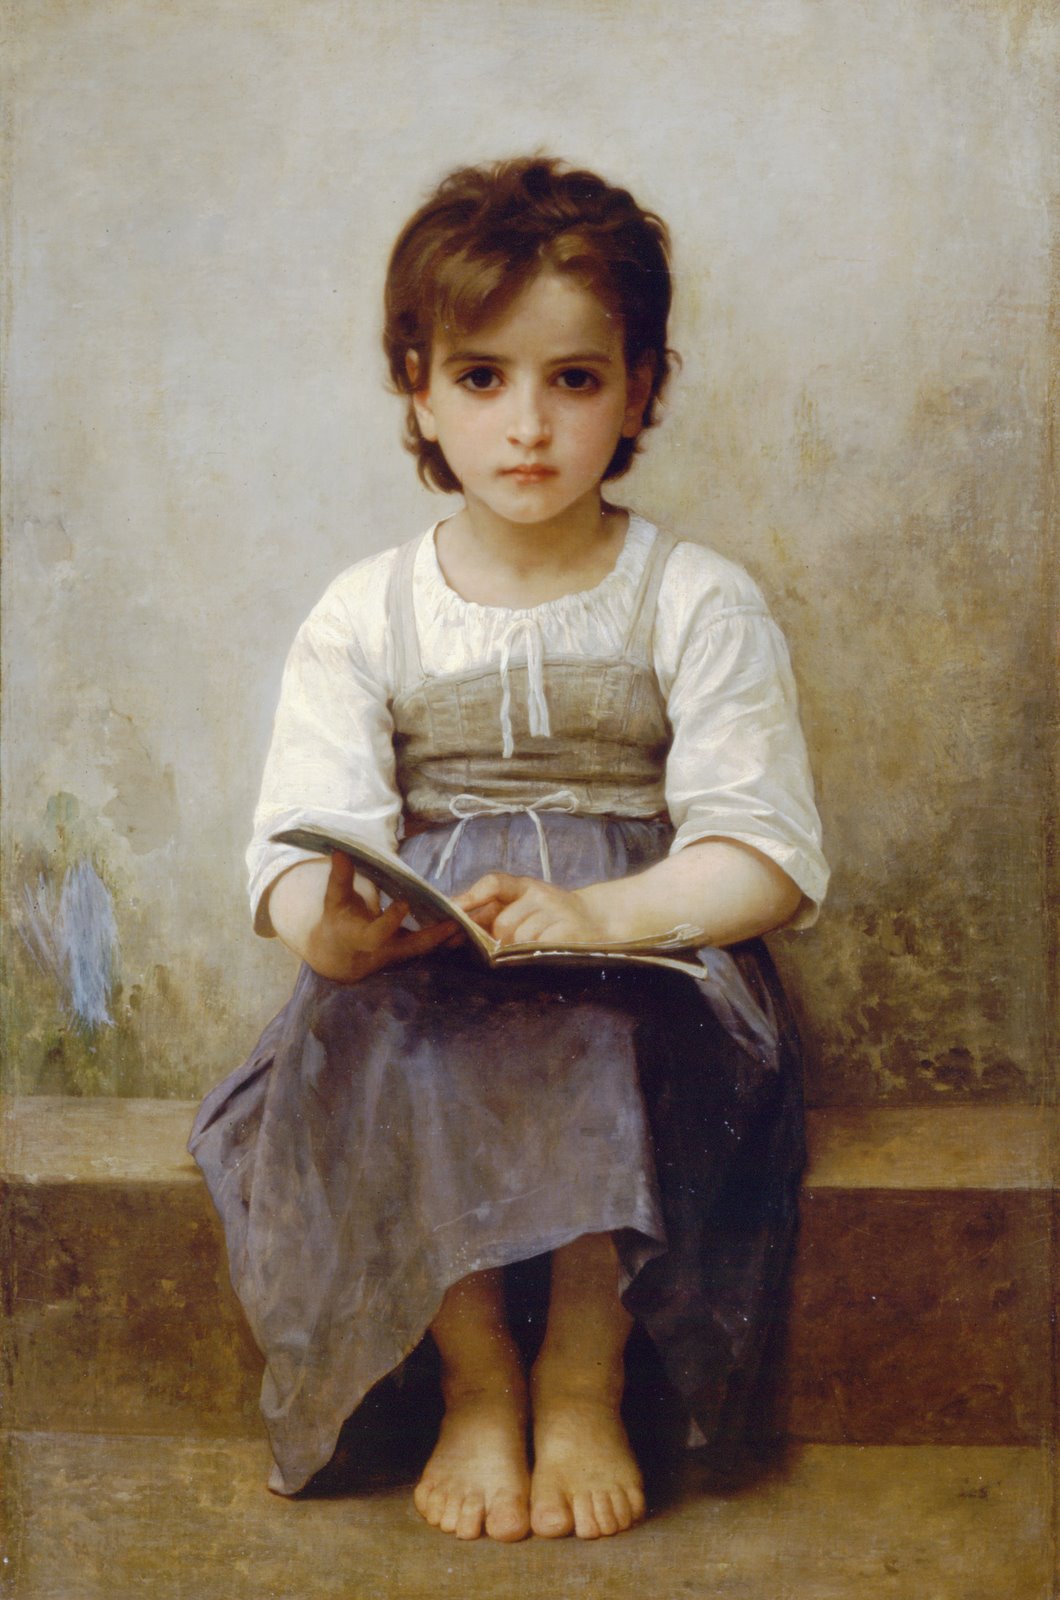 [William-Adolphe_Bouguereau_(1825-1905)_-_The_Difficult_Lesson_(1884).jpg]